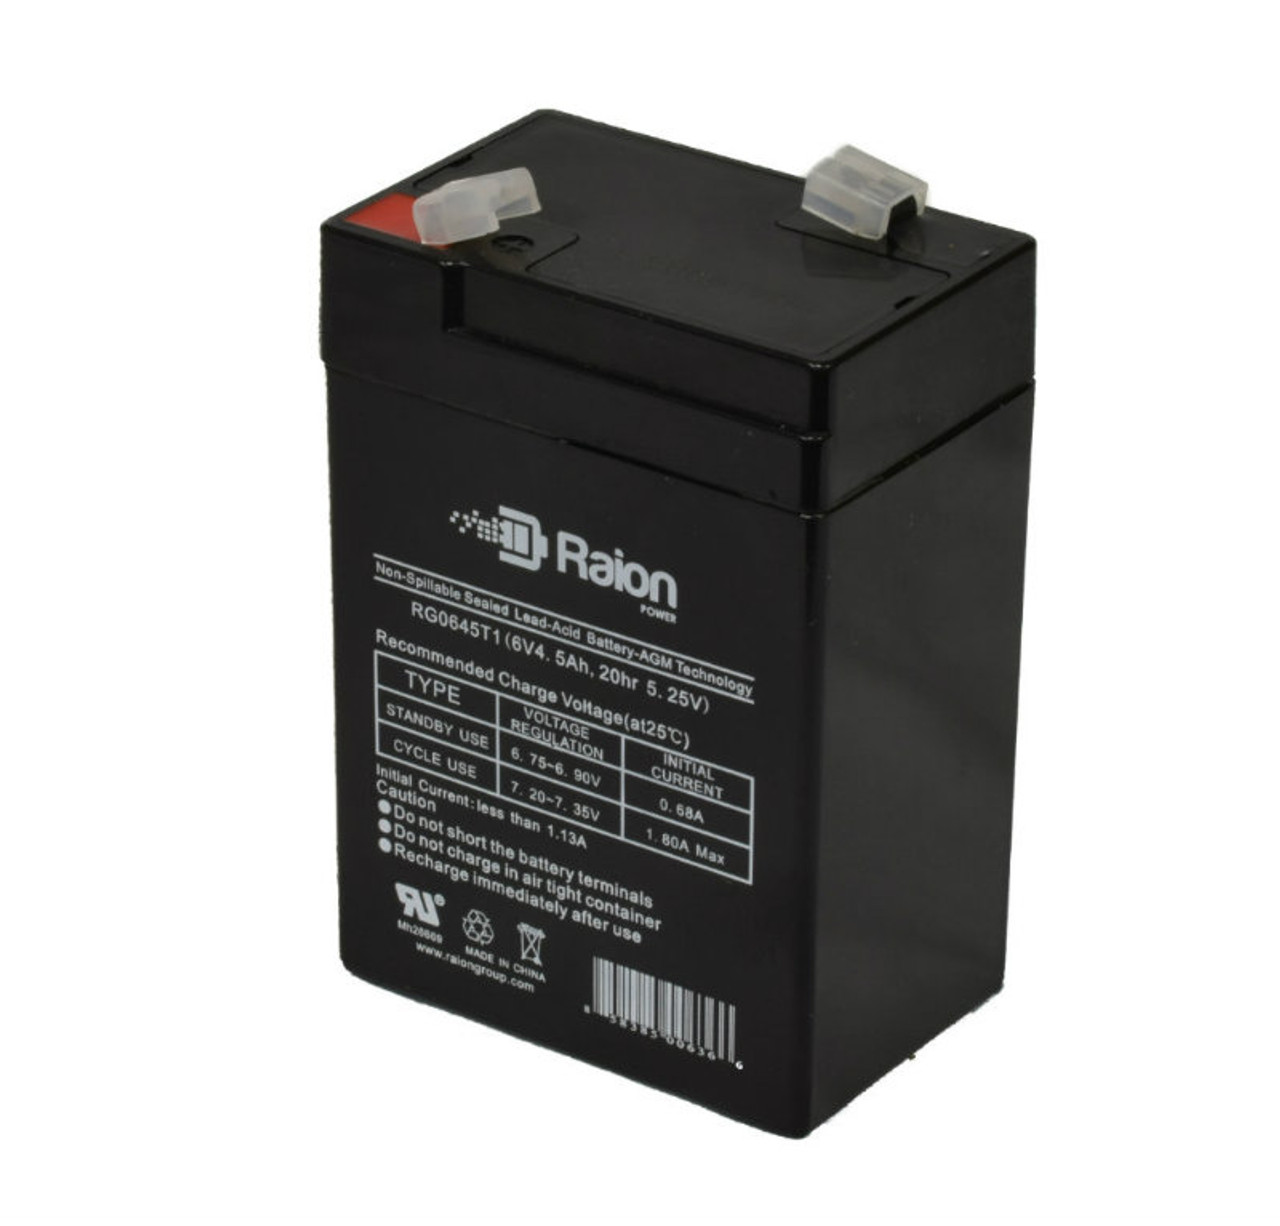 Raion Power RG0645T1 6V 4.5Ah Replacement Battery Cartridge for Power Wheels 80004-0184